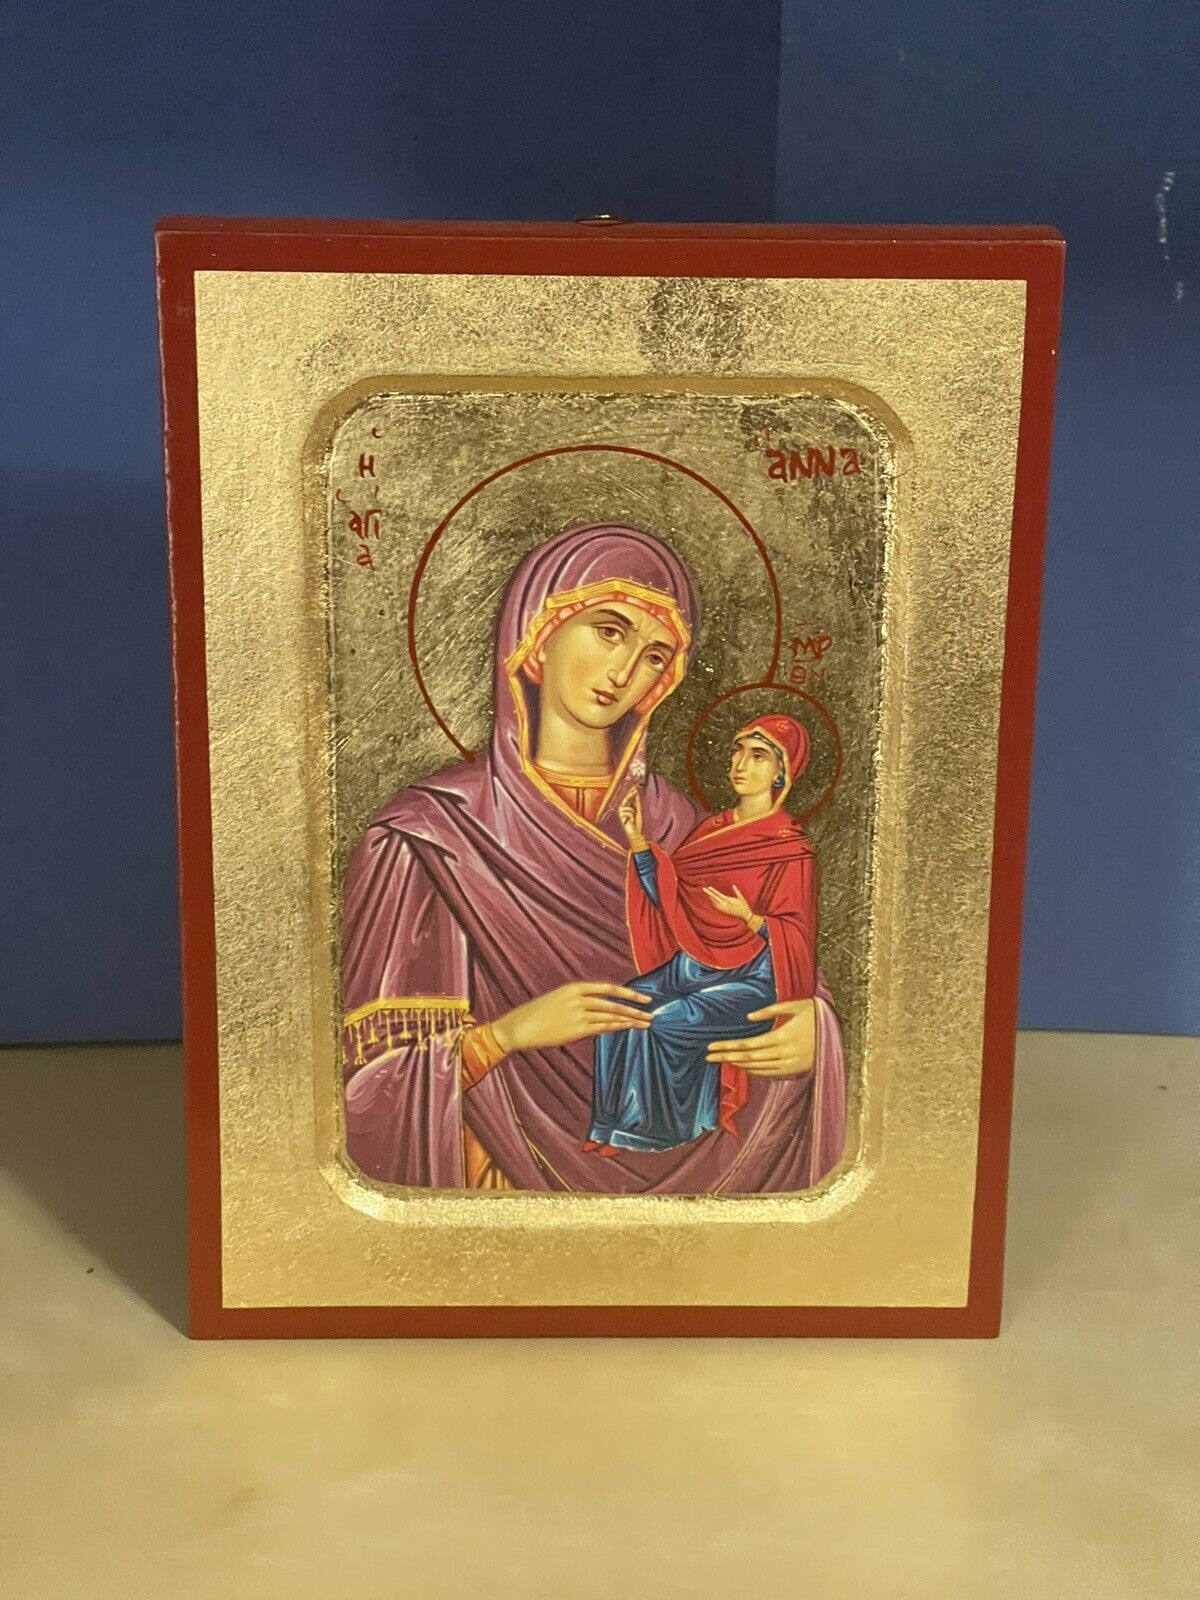 Saint Anne -GREEK RUSSIAN WOODEN ICON, CARVED WITH GOLD LEAVES 6x8 inch